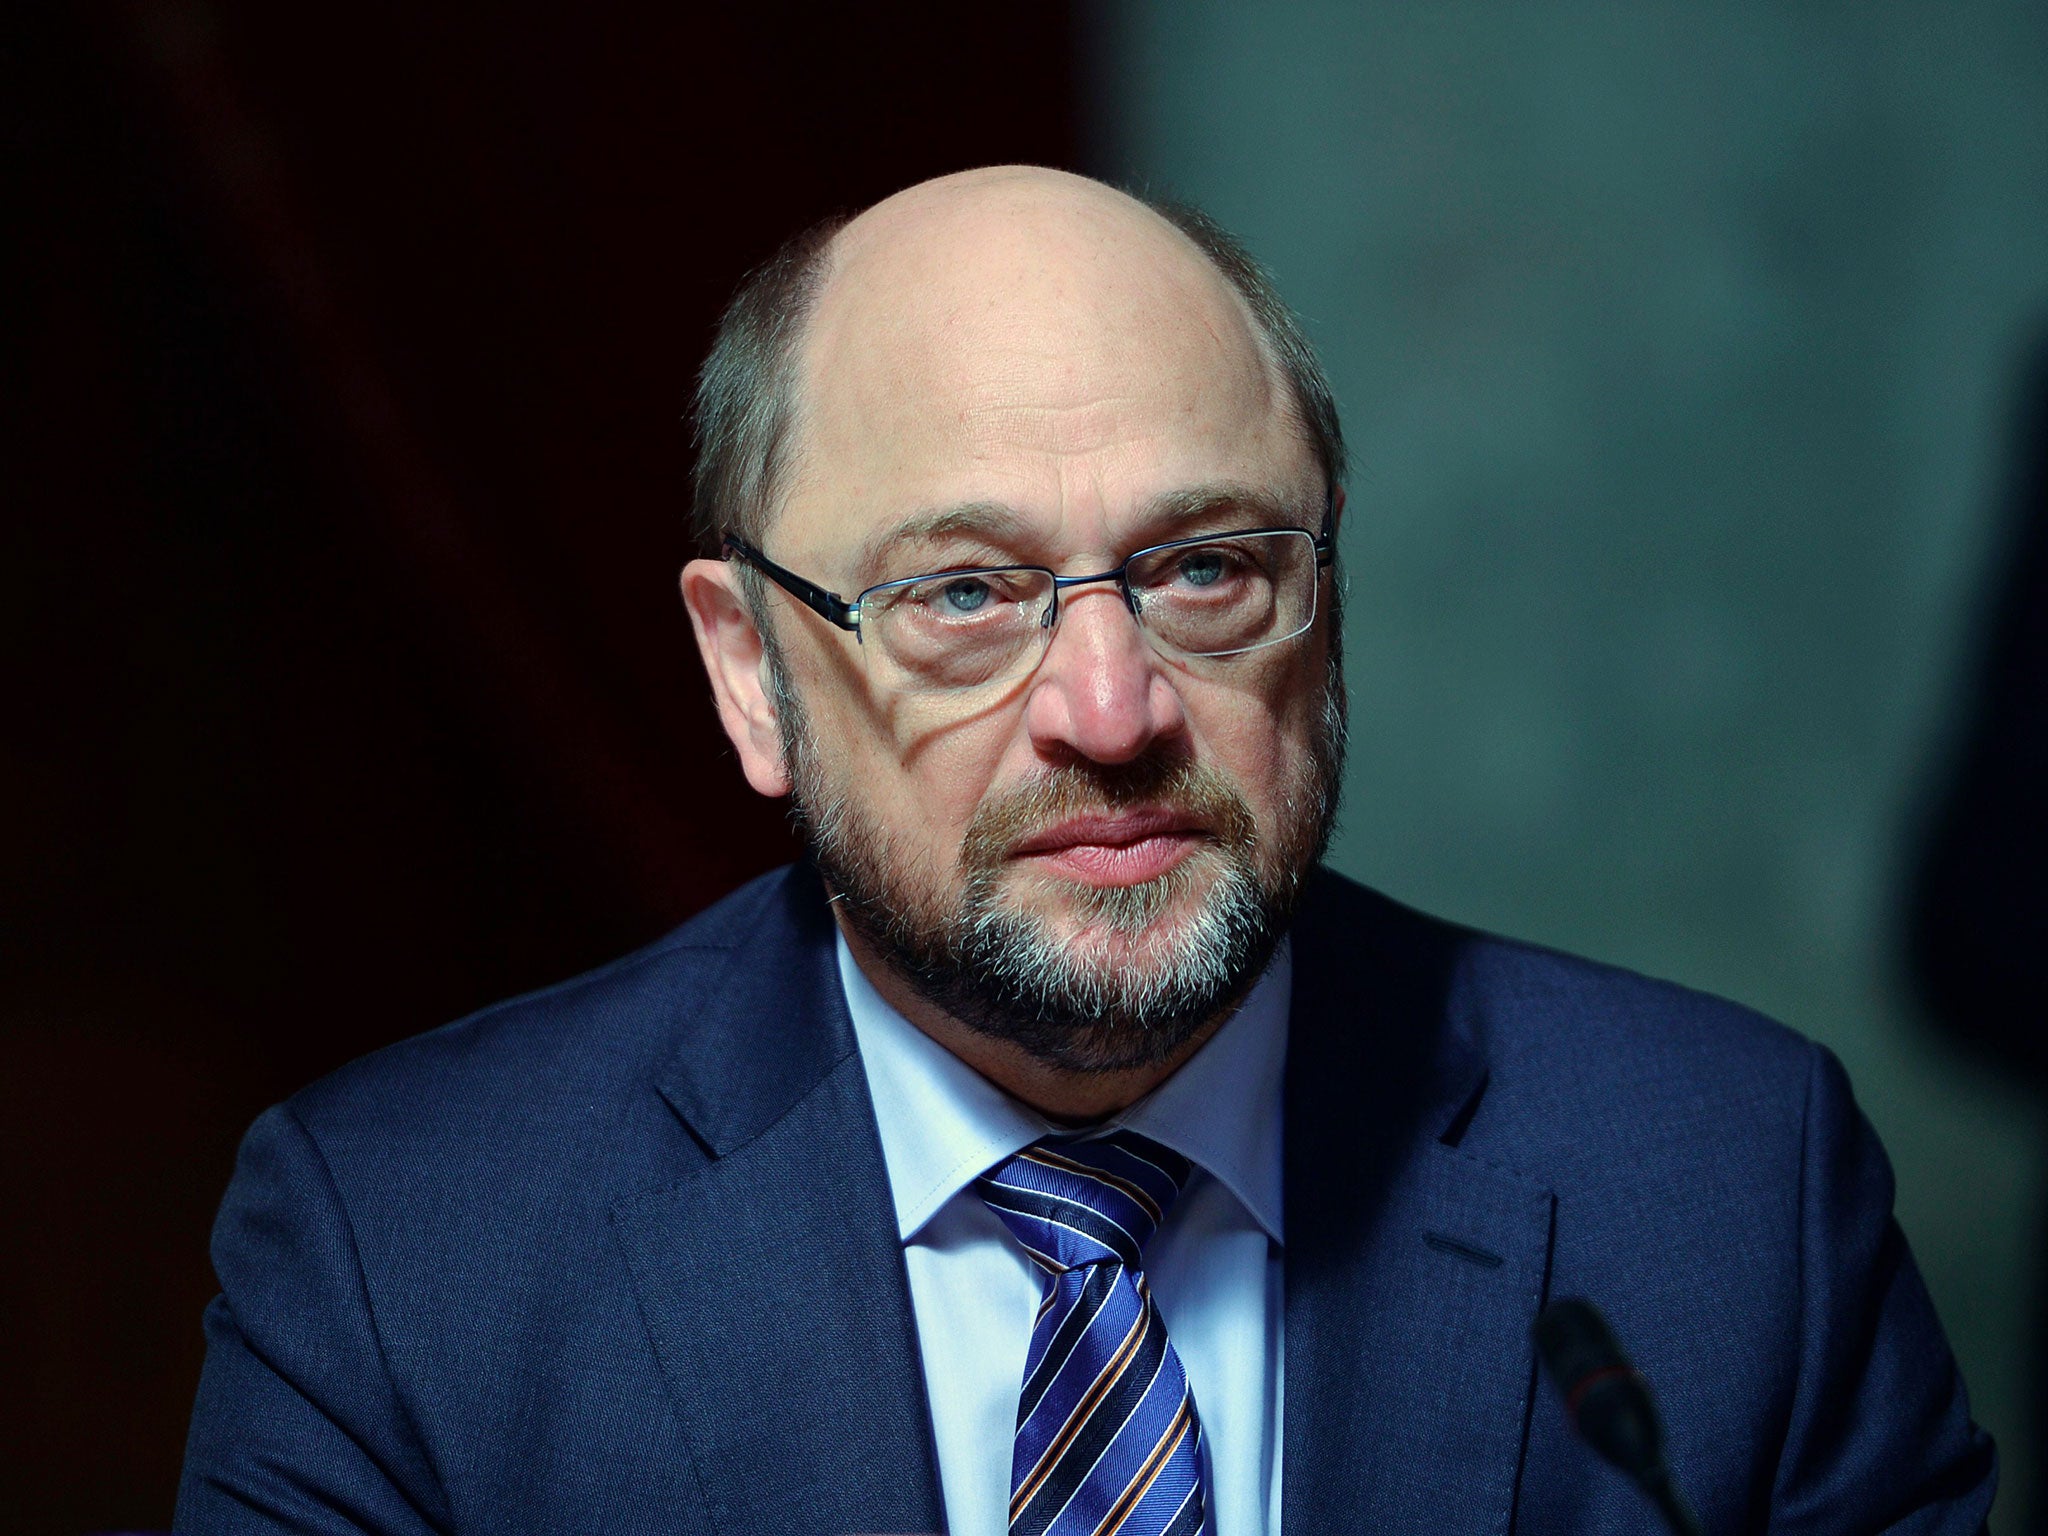 Martin Schulz wants to see the UK remain a member of the EU